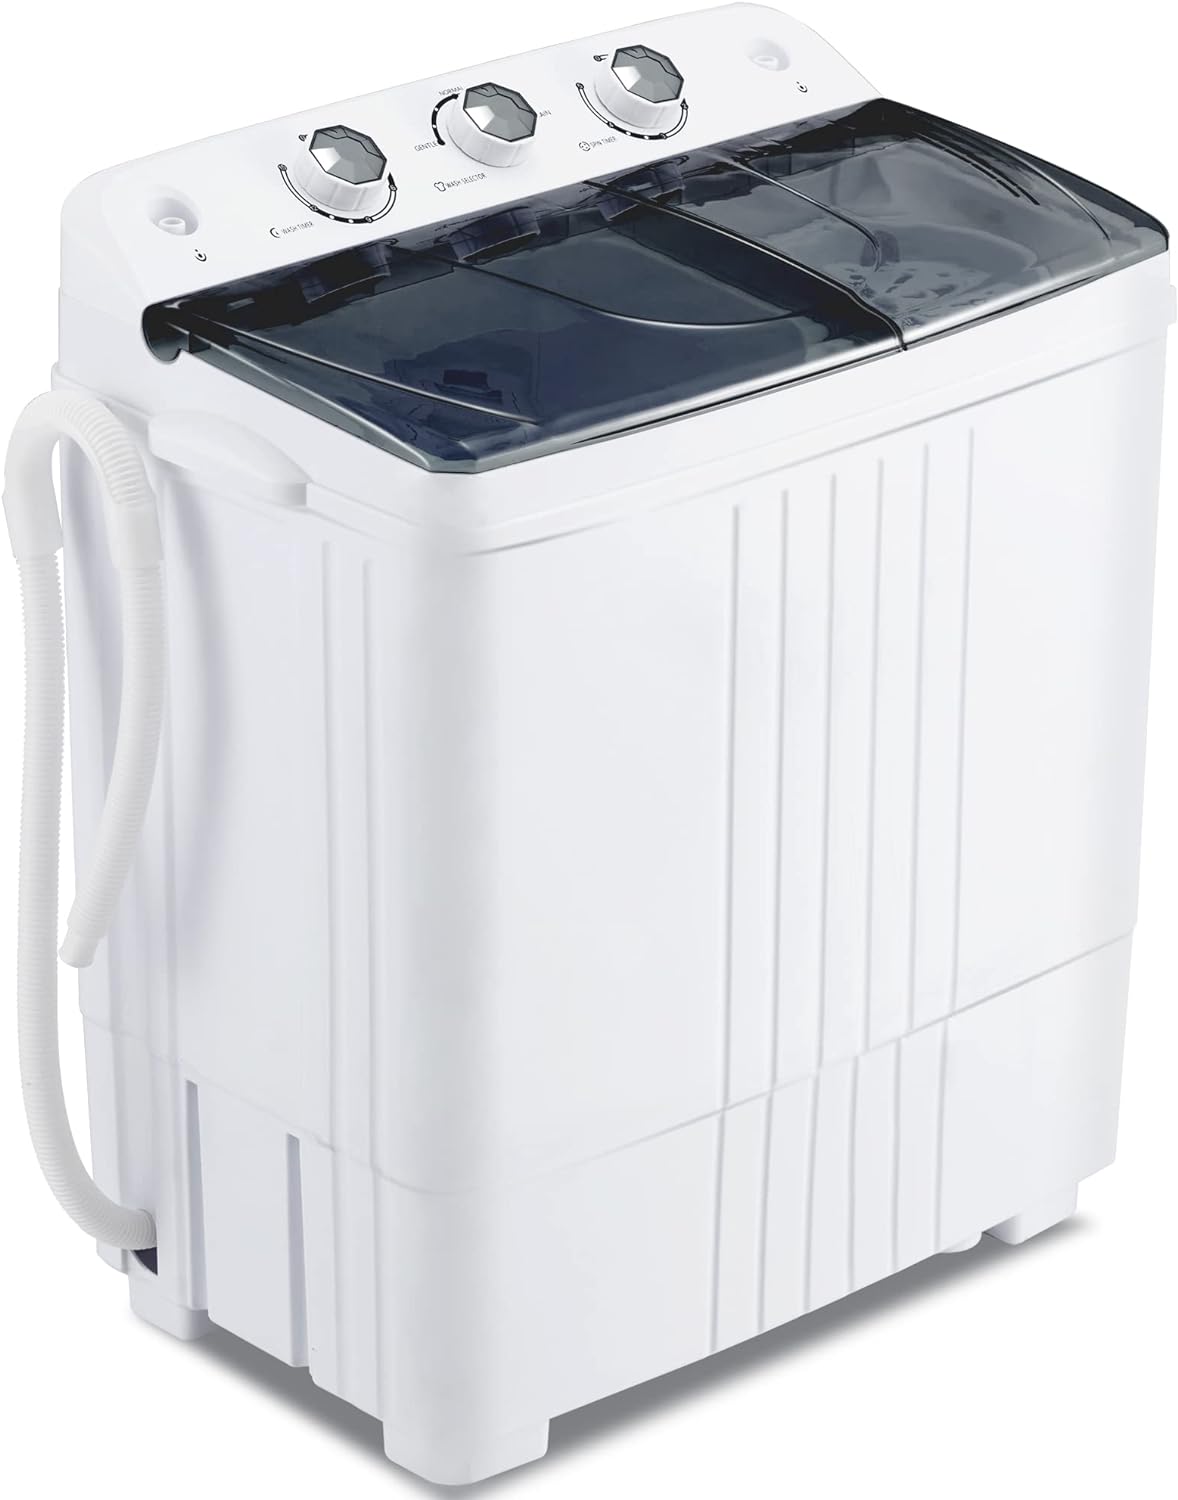 Portable Washing machine 20Lbs Capacity Mini Washer and Dryer Combo Compact Twin Tub Laundry Washer(12Lbs) & Spinner(8Lbs) Built-in Gravity Drain,Low Noise for Apartment,Dorms,RV Camping, GREY